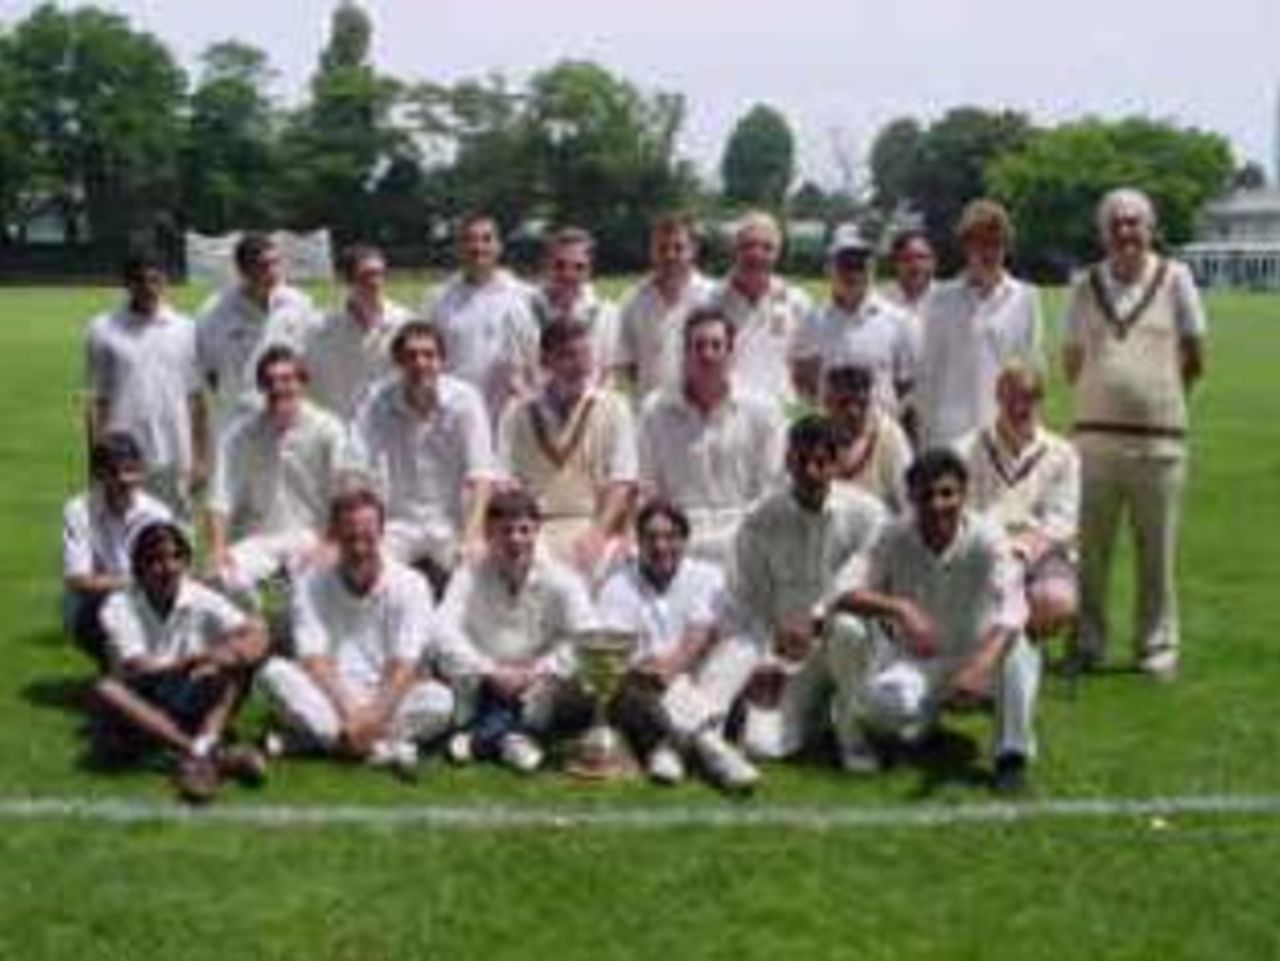 The 2 teams which competed for the Kendall cup in Oporto in 2001